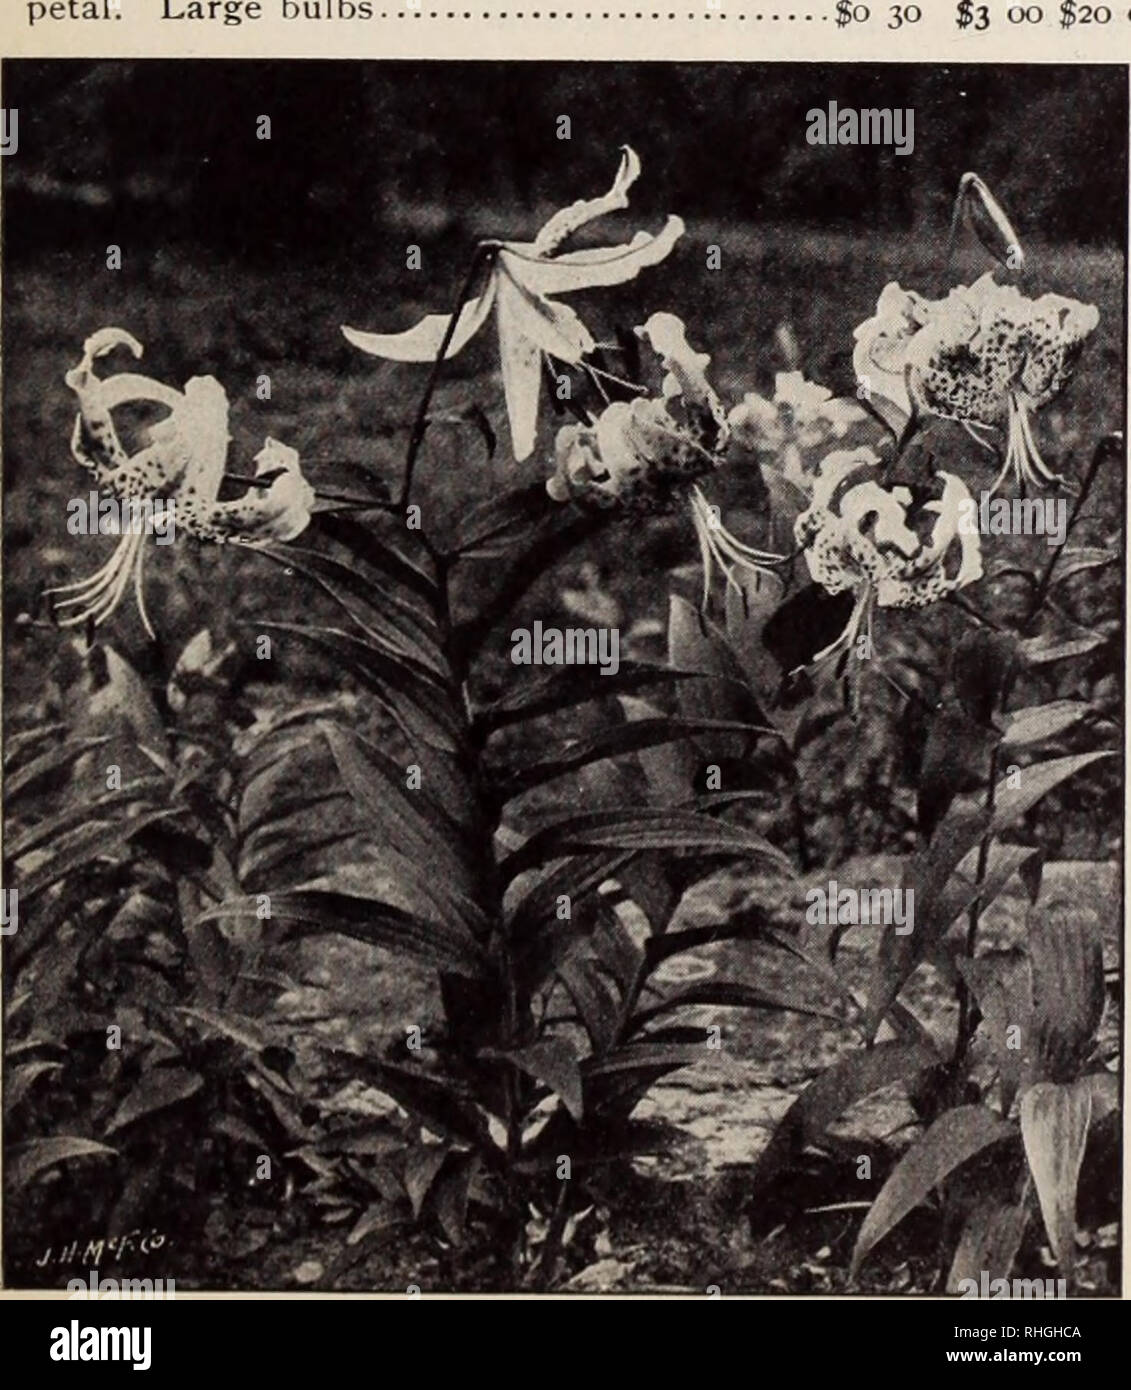 . Boddington's quality bulbs, seeds and plants / Arthur T. Boddington.. Nursery Catalogue. 100 00 Doz. Lilium Bpeciosum (type) Lilium auratum (type) LILIUM AURATUM PLATYPHYLLUM. Each A very strong and vigorous type of L. auratum. Flowers of immei se size, pure ivory white, with a deep golden band through each petal.' Mammoth bulbs $050 $400 53000 Large bulbs ..- 40 350 2500 LILIUM AURATUM RUBRUM VITTA- TUM. A unique variety; flowers 10 to 12 inches across, ivory white, with broad crimson stripe through center of each petal. Large bulbs 60 6 00 45 00 LILIUM AURATUM VIRGINALE ALBUM. The White Li Stock Photo